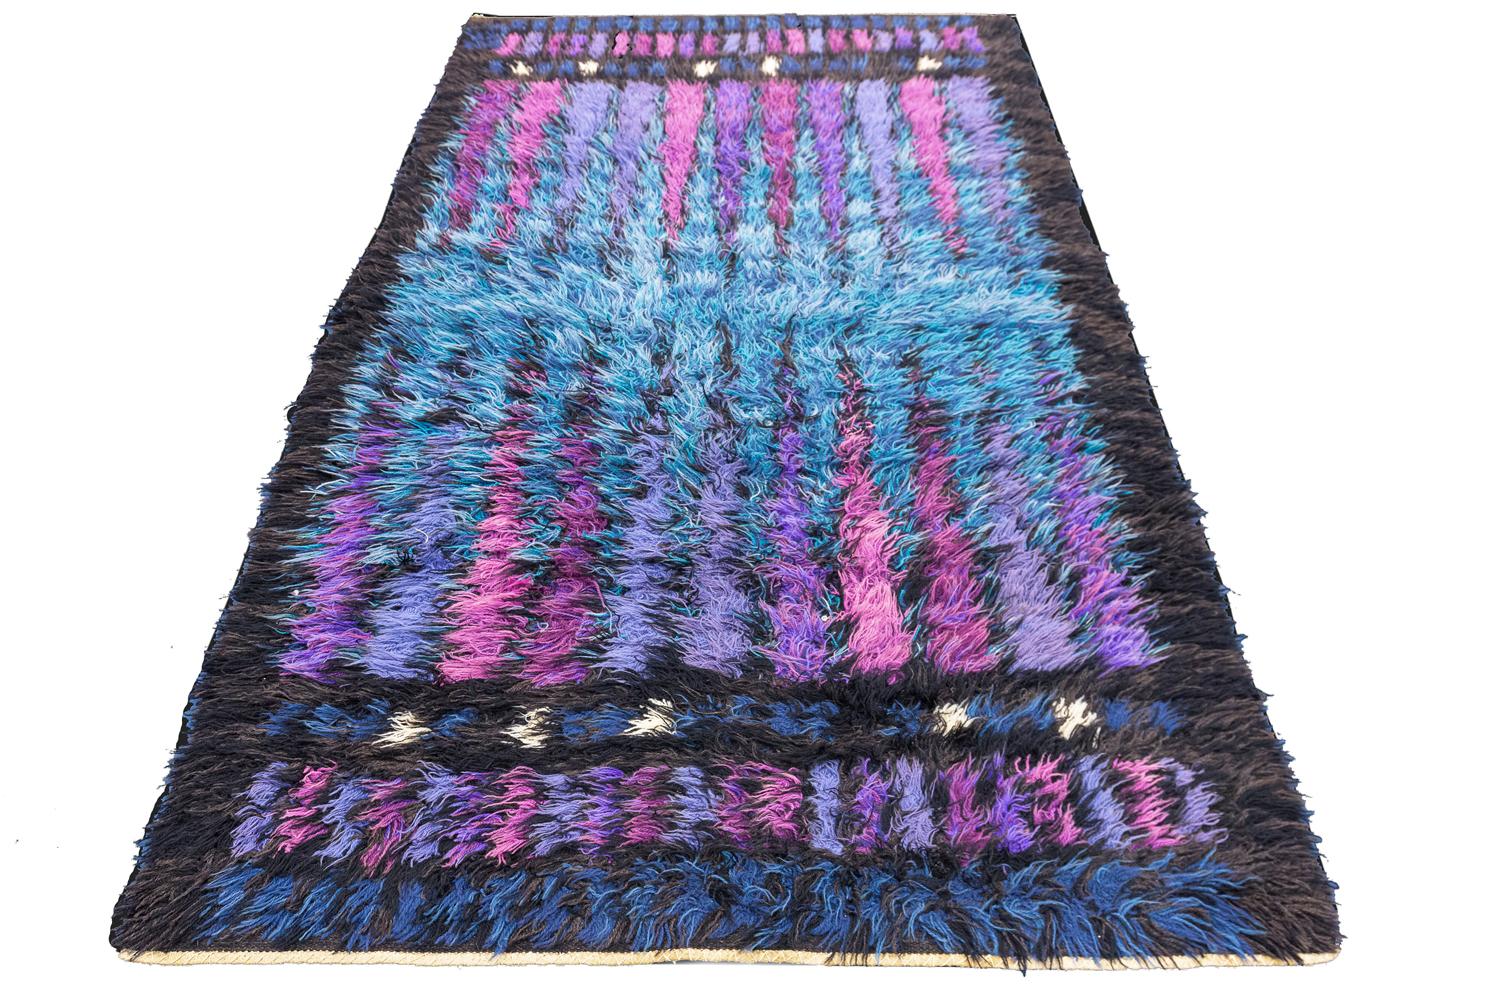 This is a vintage Swedish rug circa 1950-1970 known as a “Rya” rug which translates to simply rug and its size is 224 x 127CM. Its field makes up a back-gammon type of design with many inner field protruding spikes. It's in full pile condition and